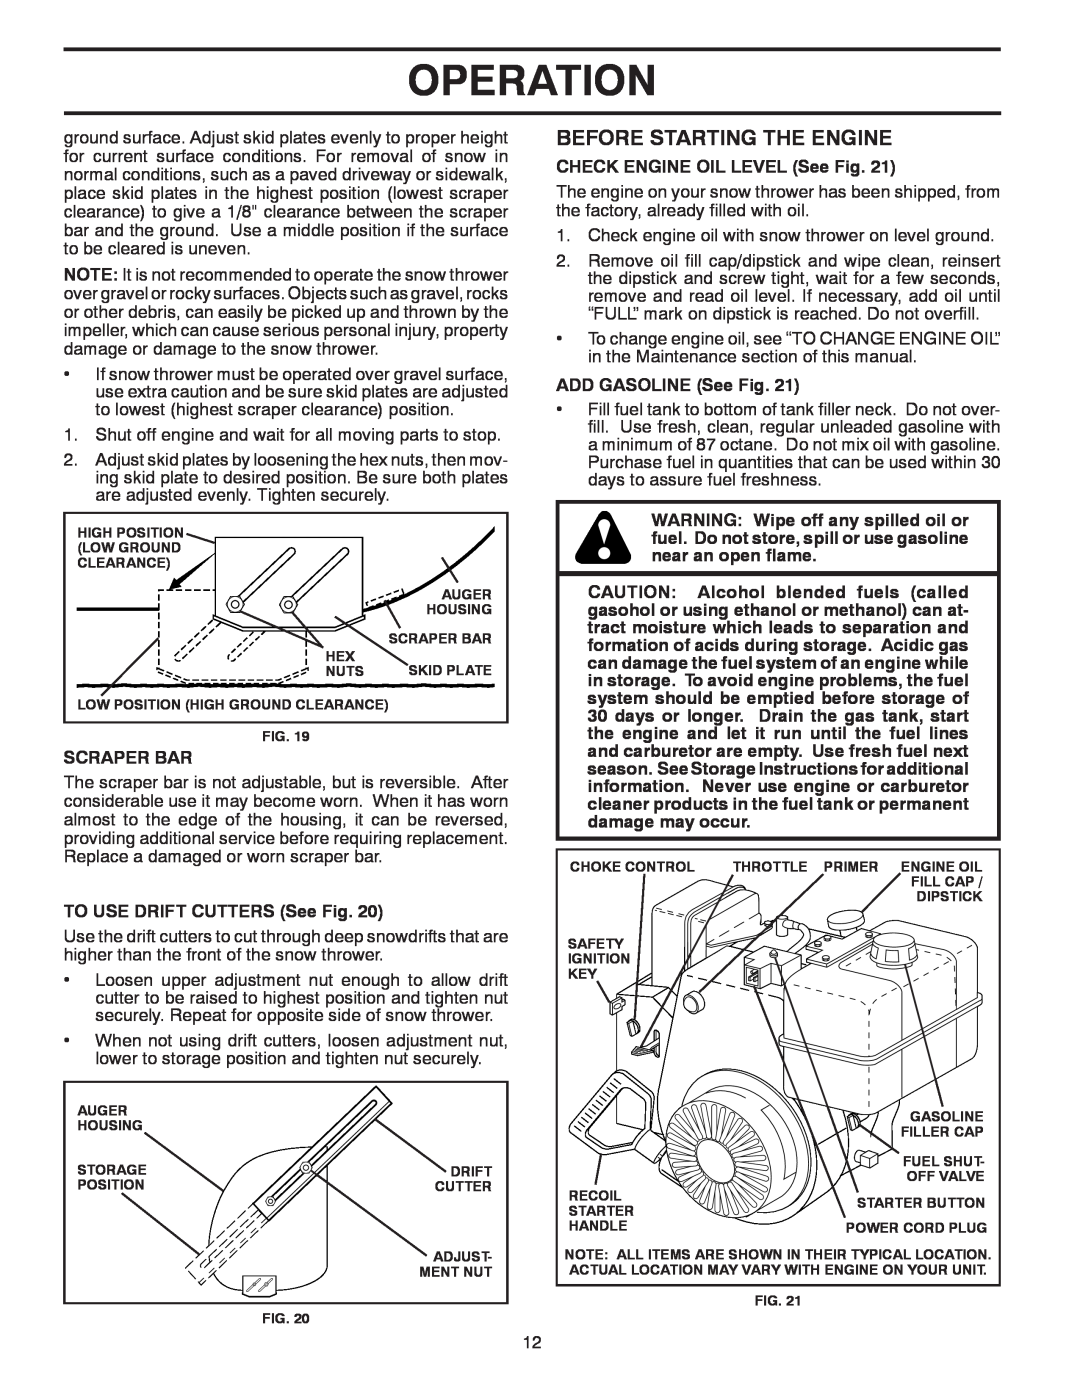 Poulan 96192001902, 420915 owner manual Before Starting The Engine, Operation, Scraper Bar, CHECK ENGINE OIL LEVEL See Fig 